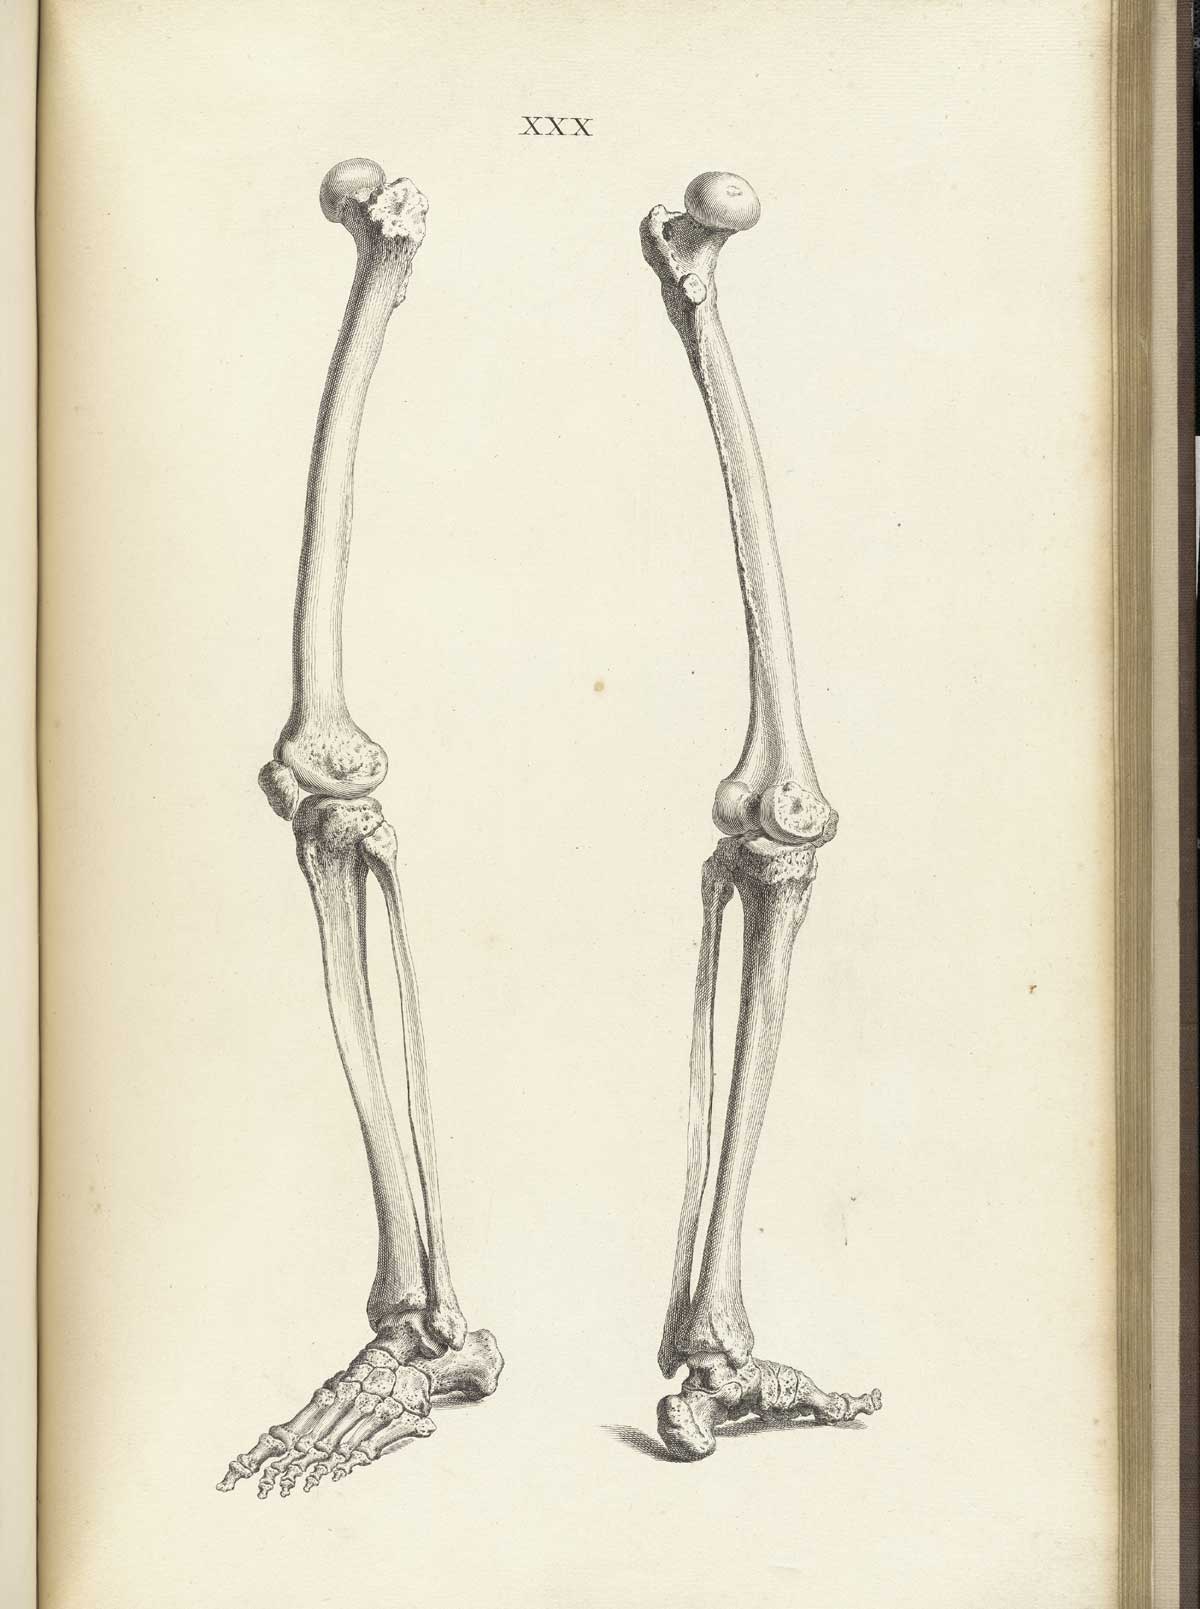 Engraving showing the bones of the lower limbs, left and right, including the tibias, femurs, patellas, and bones of the feet, from William Cheselden’s Osteographia, NLM Call no.: WZ 260 C499o 1733.